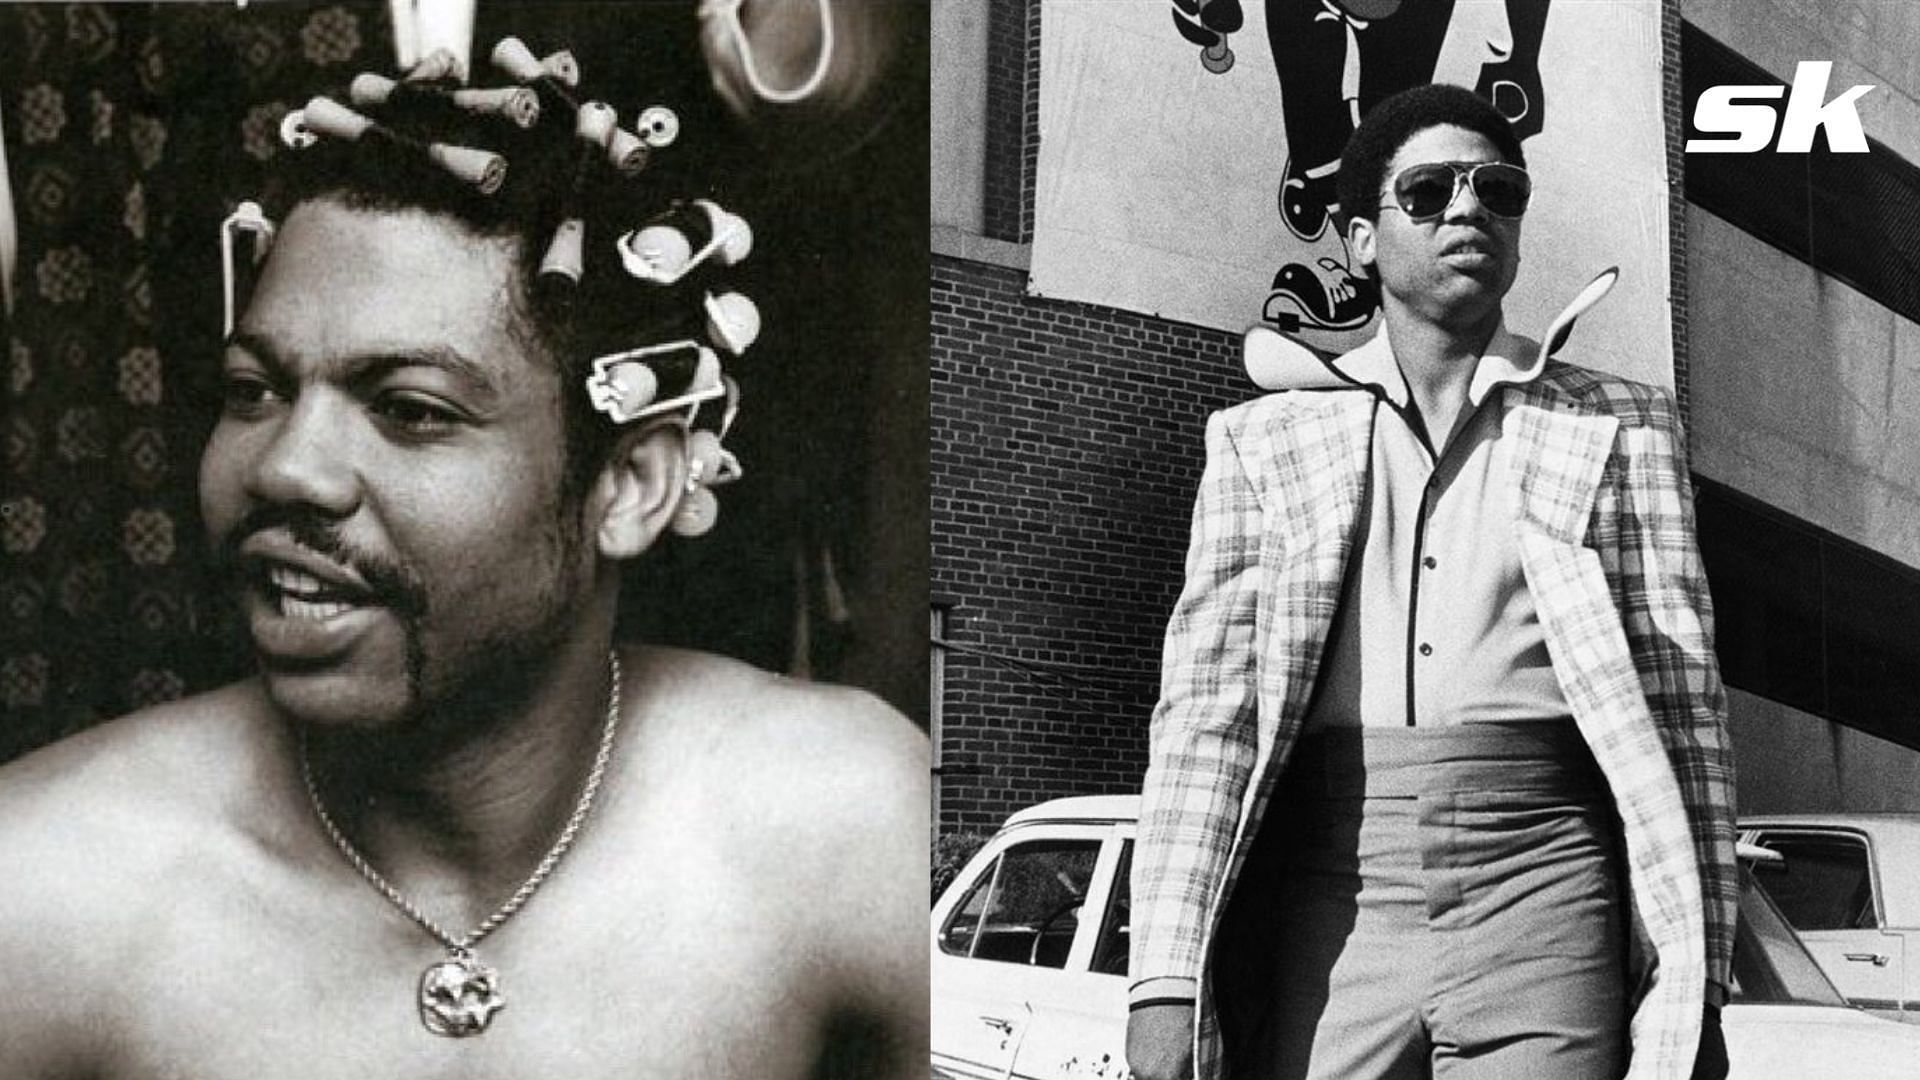 Former Pittsburgh Pirates pitcher Dock Ellis threw a no-hitter while under the influence of LSD